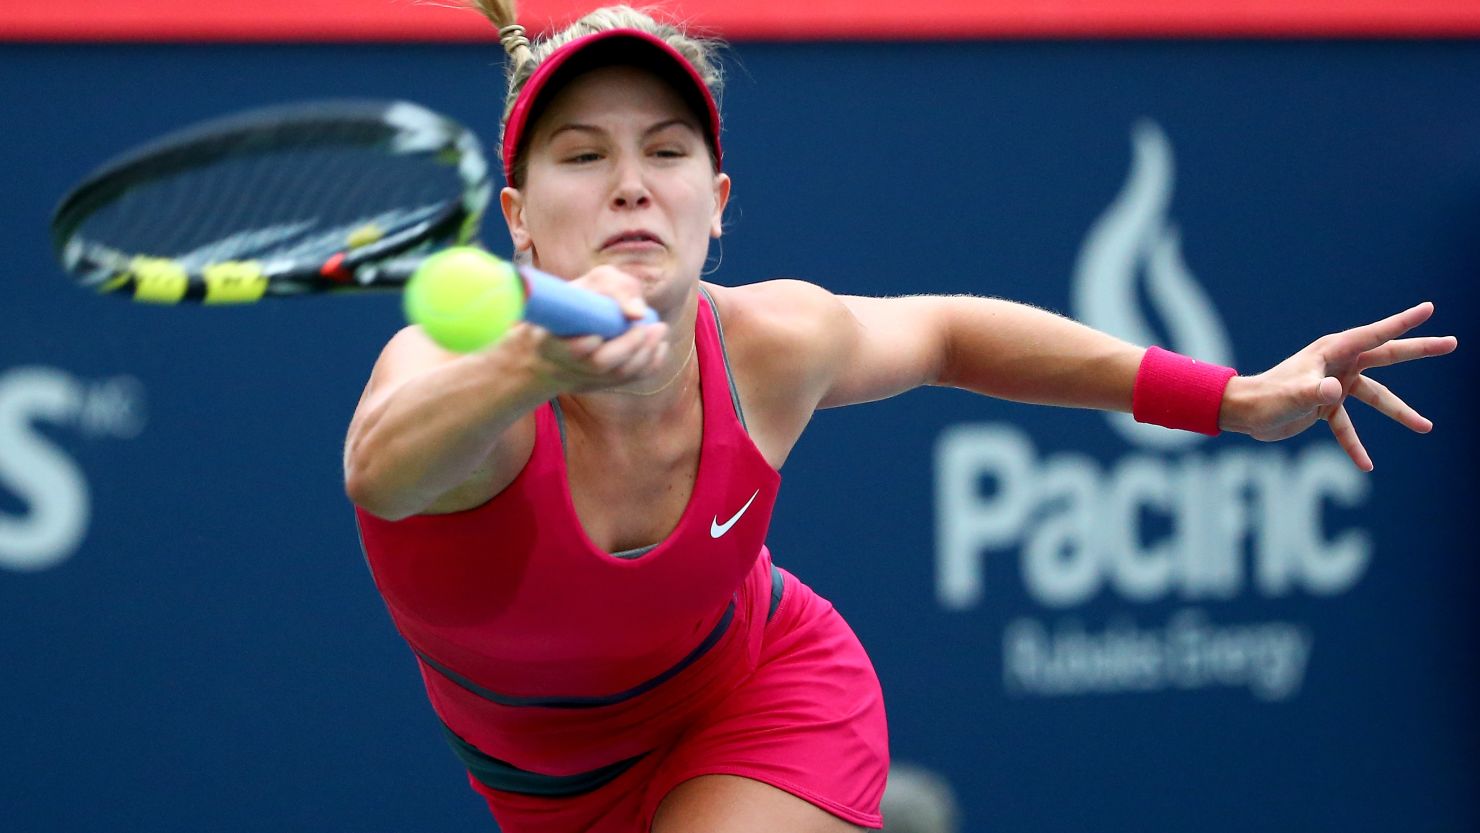 Eugenie Bouchard was unable to defeat Shelby Rogers in front of a home crowd in Montreal.